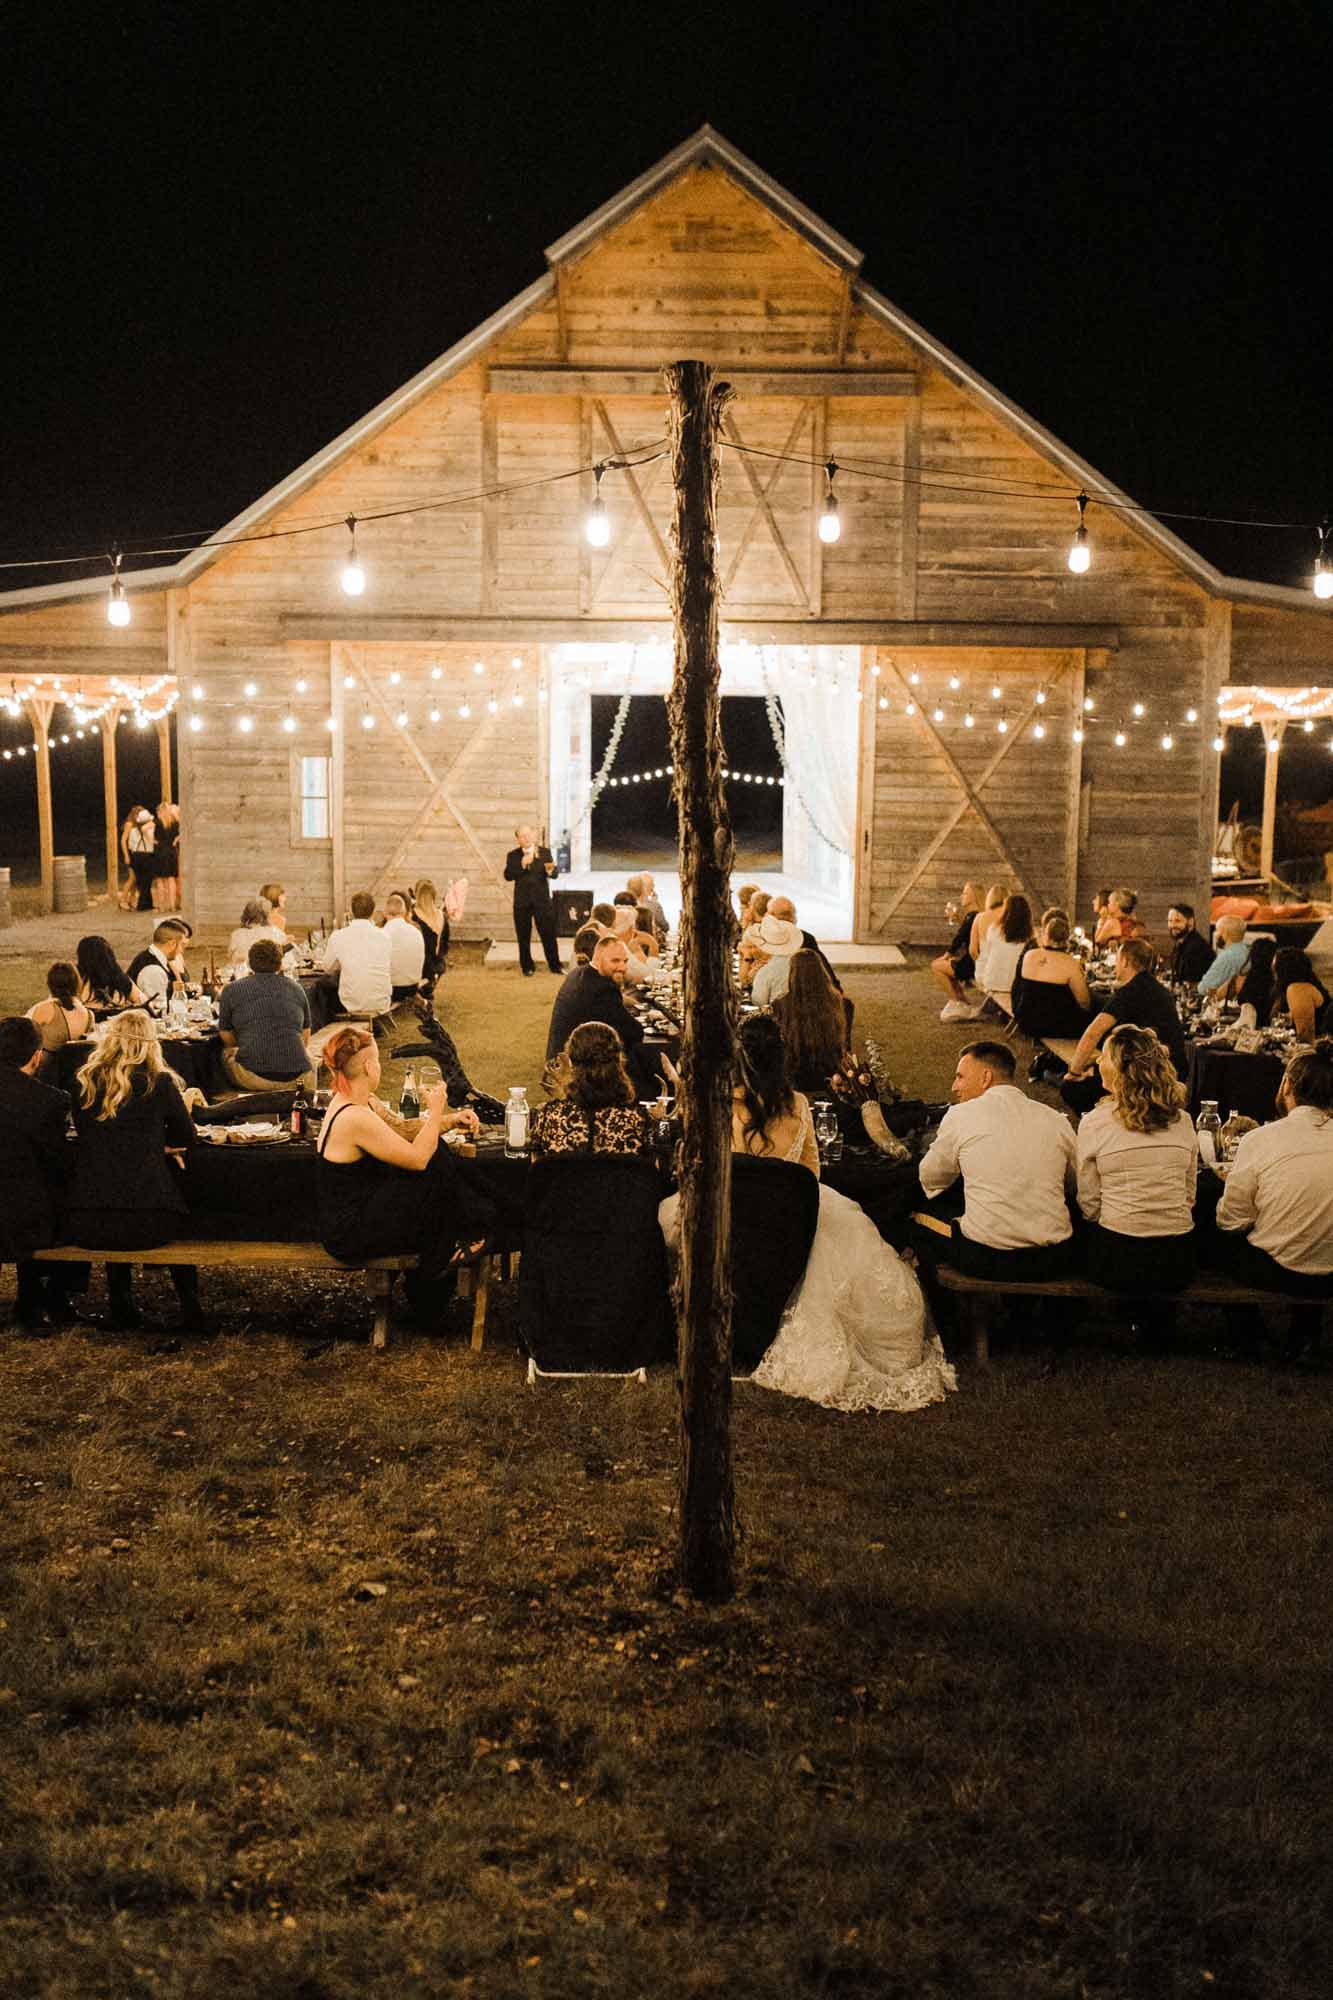 Beautifully gothic Texas wedding with creative details, photo by Leah Thomason Photography, featured on Equally Wed, the LGBTQ+ wedding magazine barn outdoor wedding reception